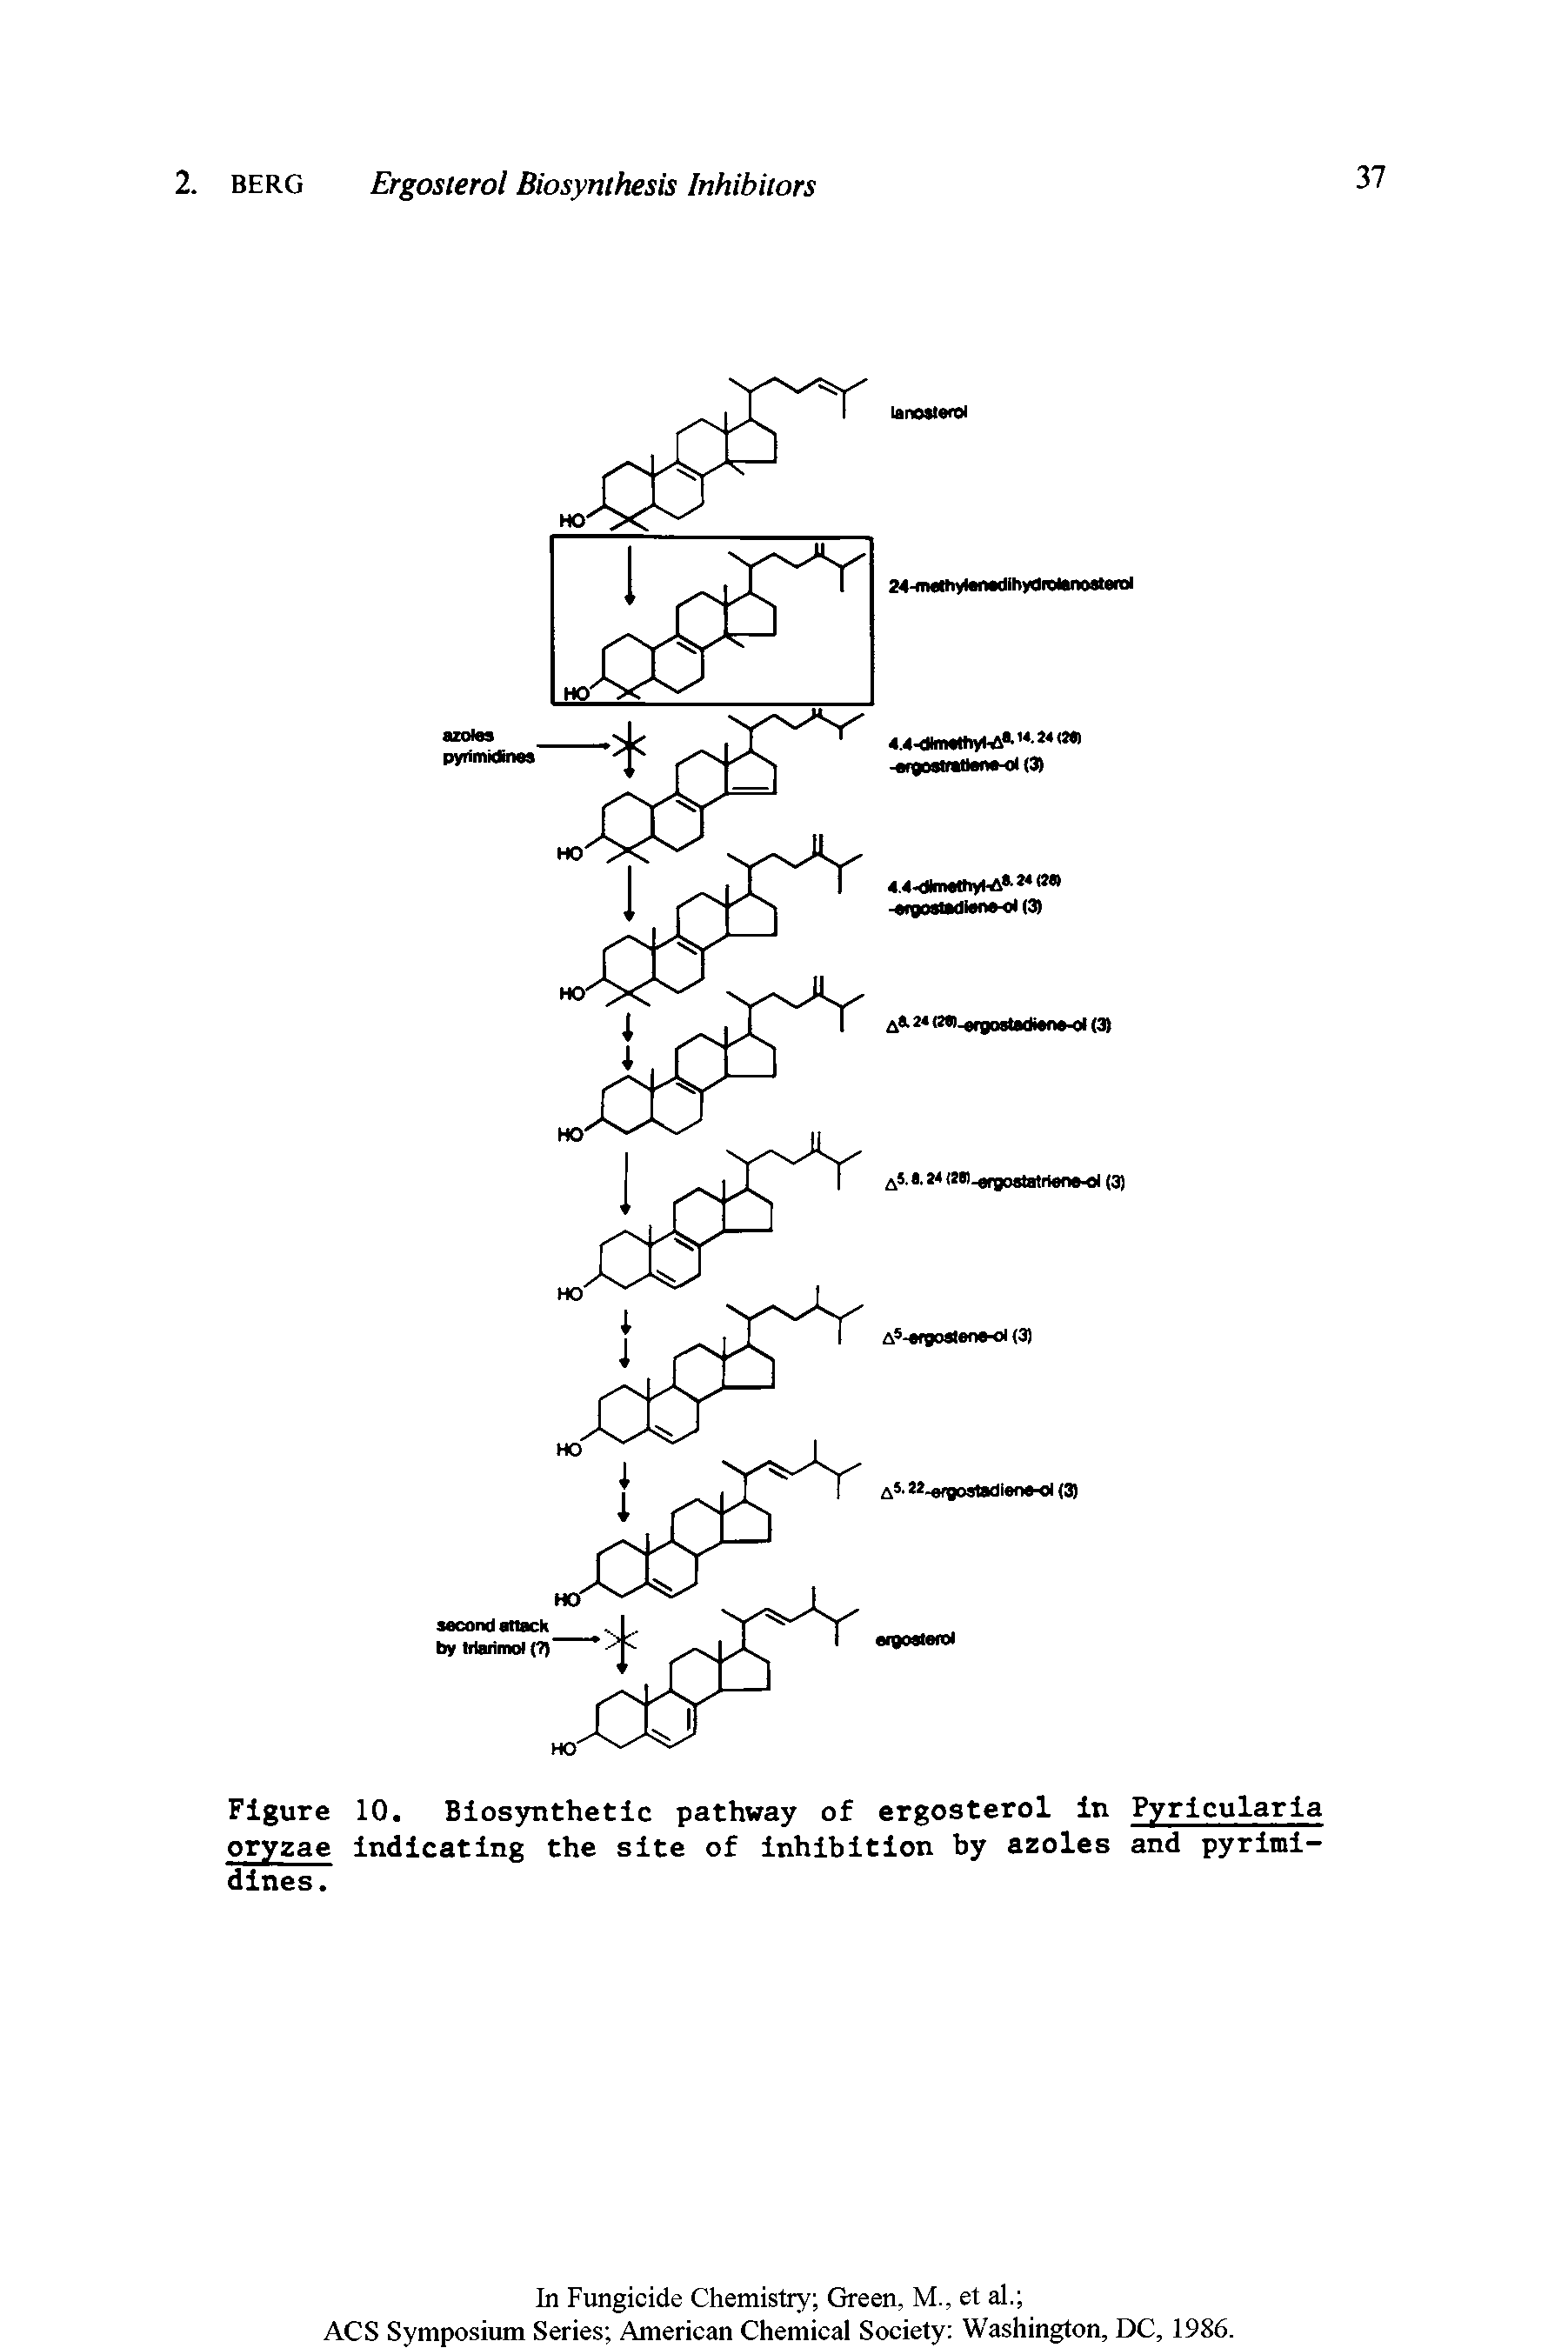 Figure 10. Biosynthetic pathway of ergosterol in Pyricularia oryzae indicating the site of inhibition by azoles and pyrimidines.